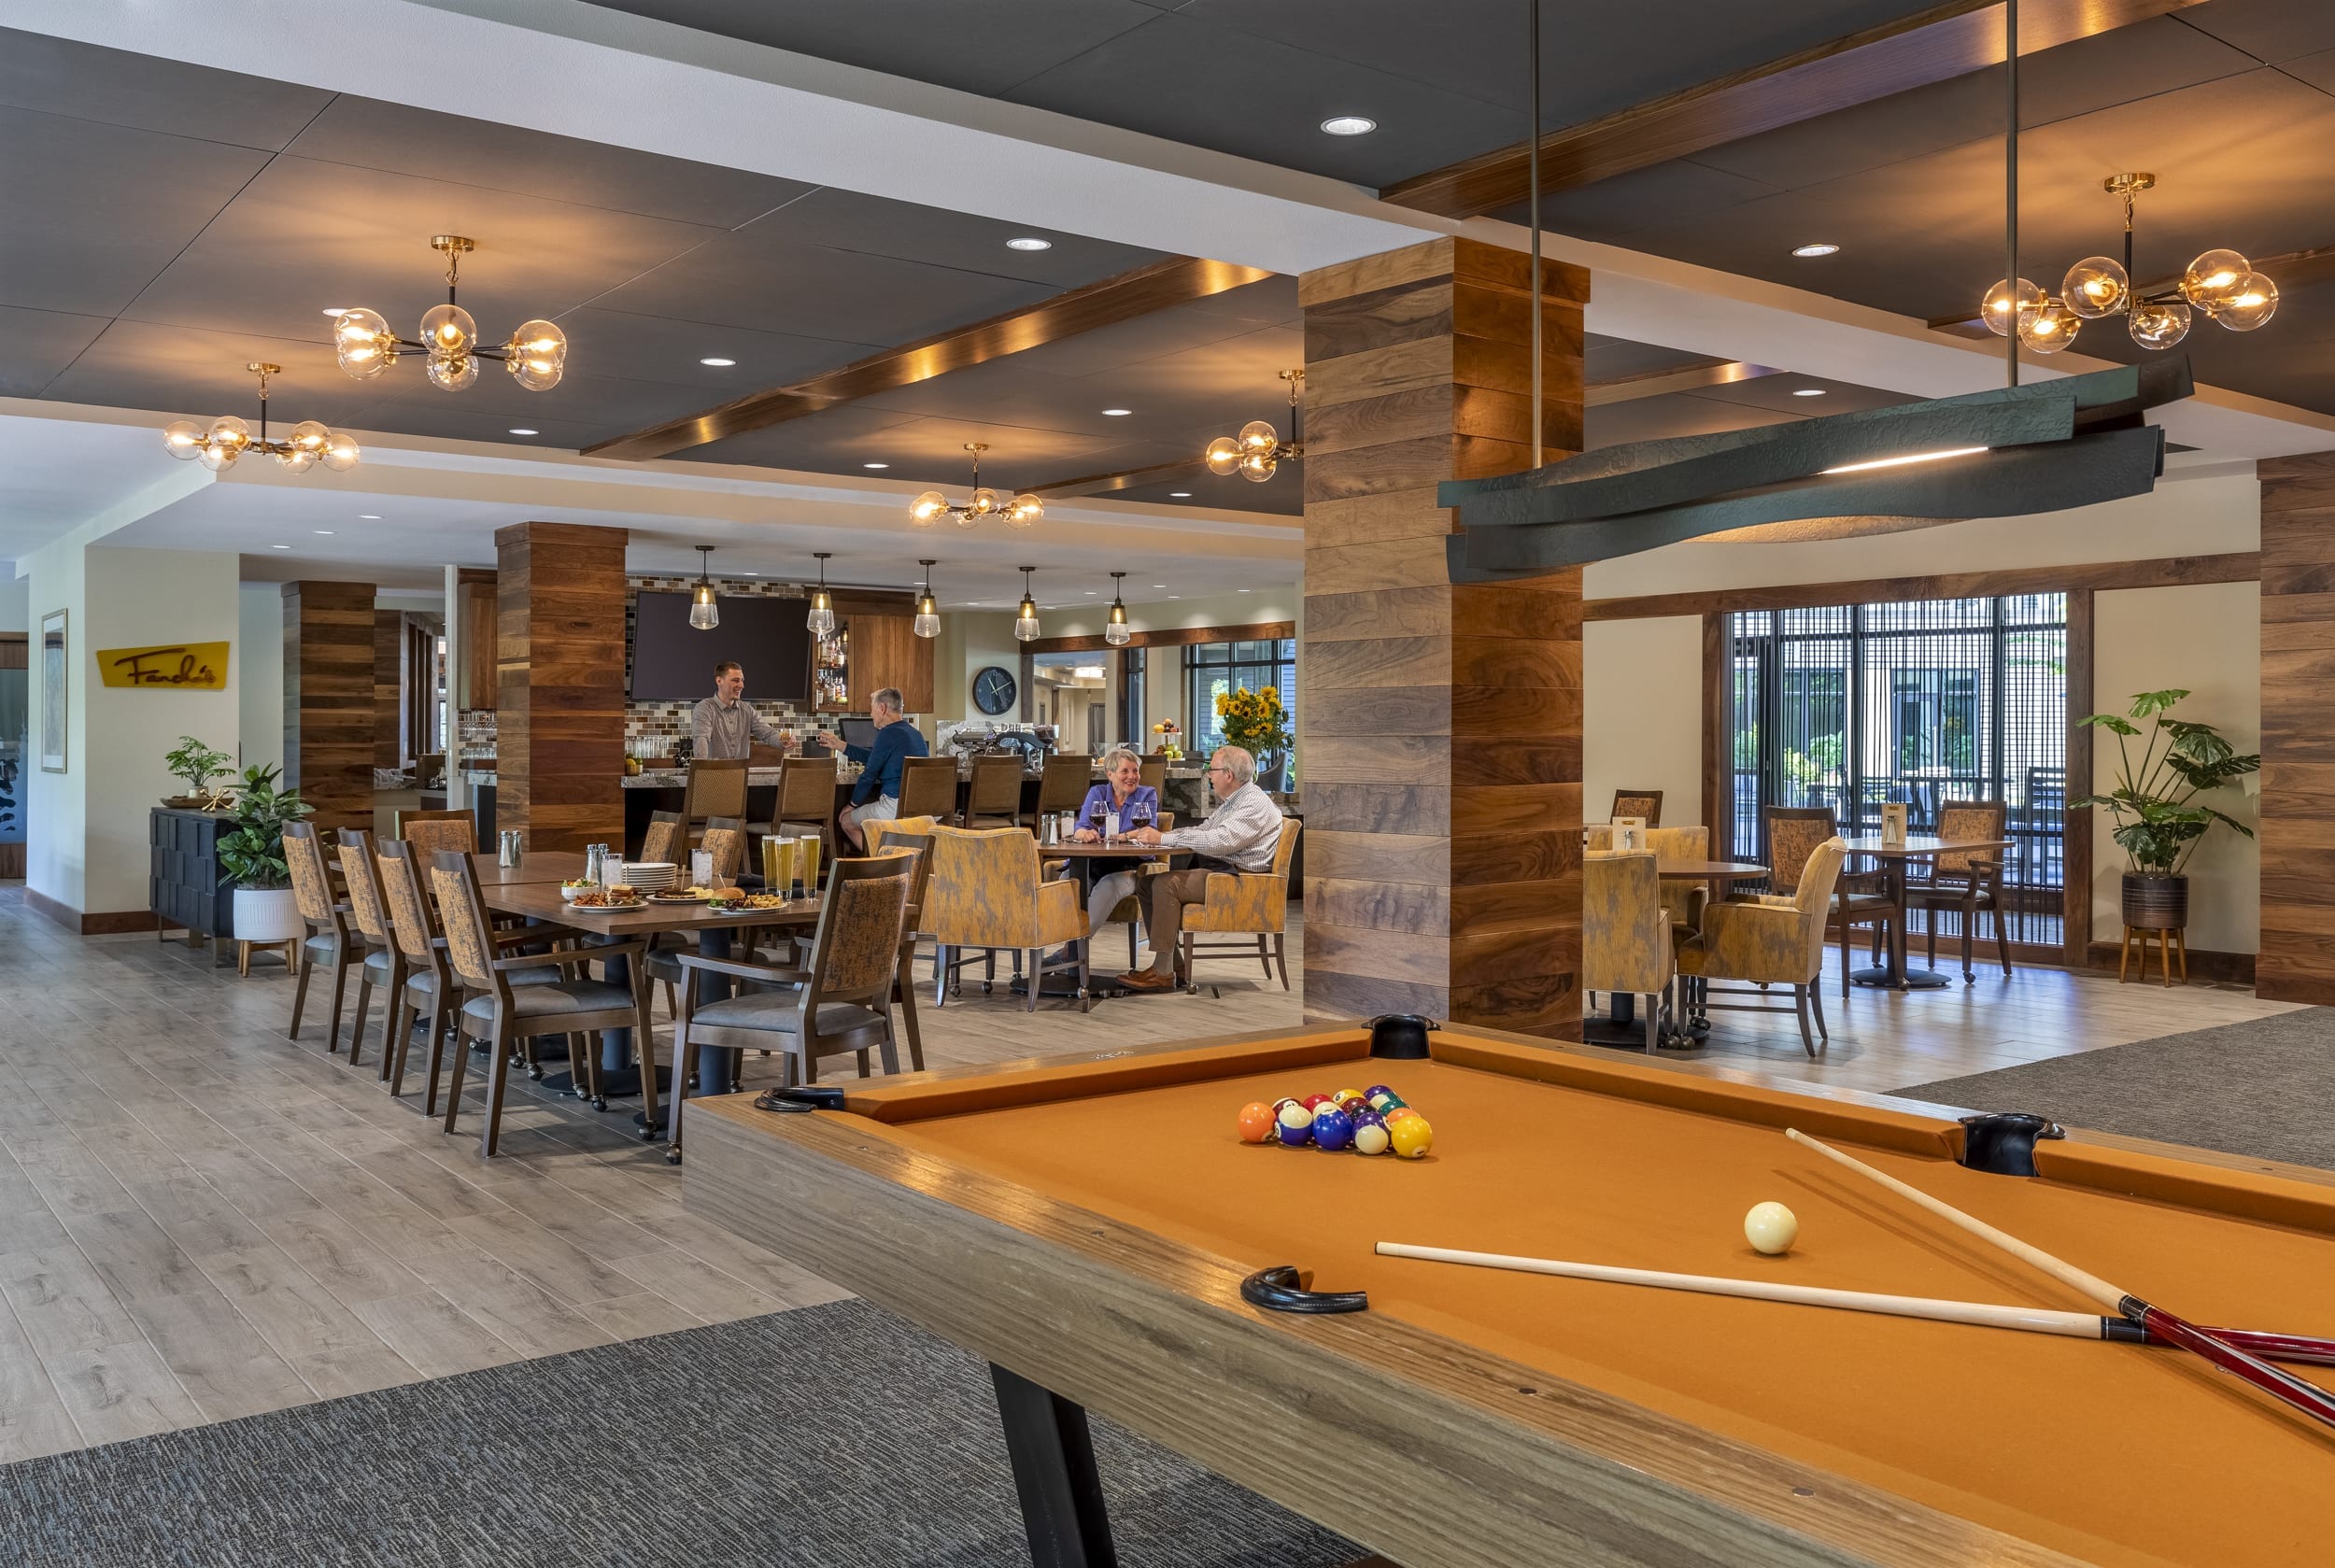 The Springs Living bar, seating area, and pool table.